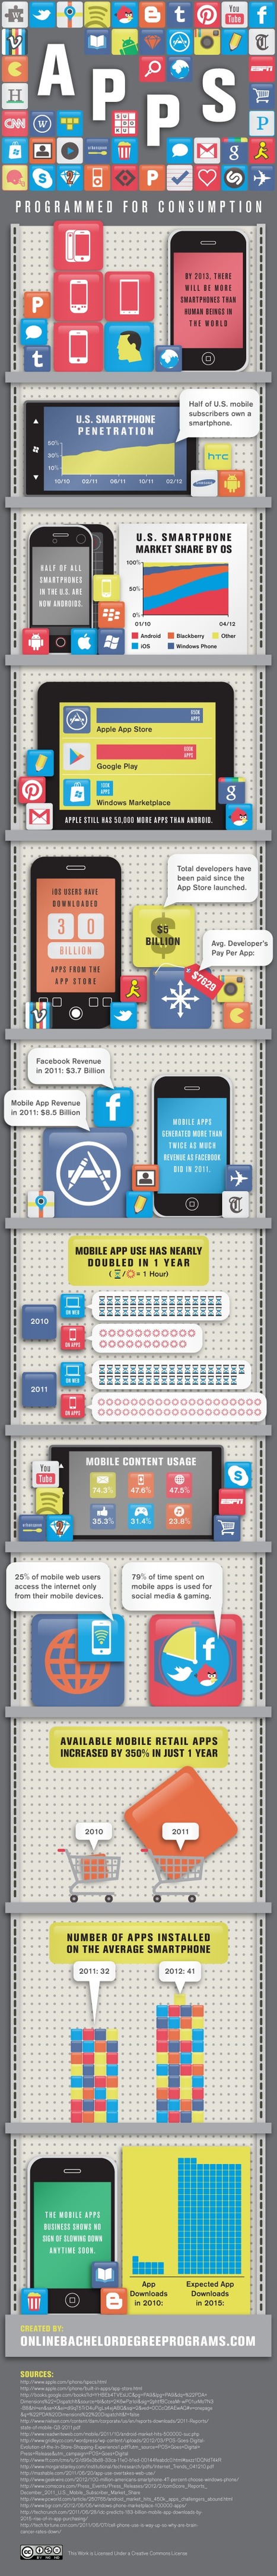 Mobile Web is Not COMING It’s HERE Just In Case You Haven’t Noticed [Infographic] | 21st Century Learning and Teaching | Scoop.it